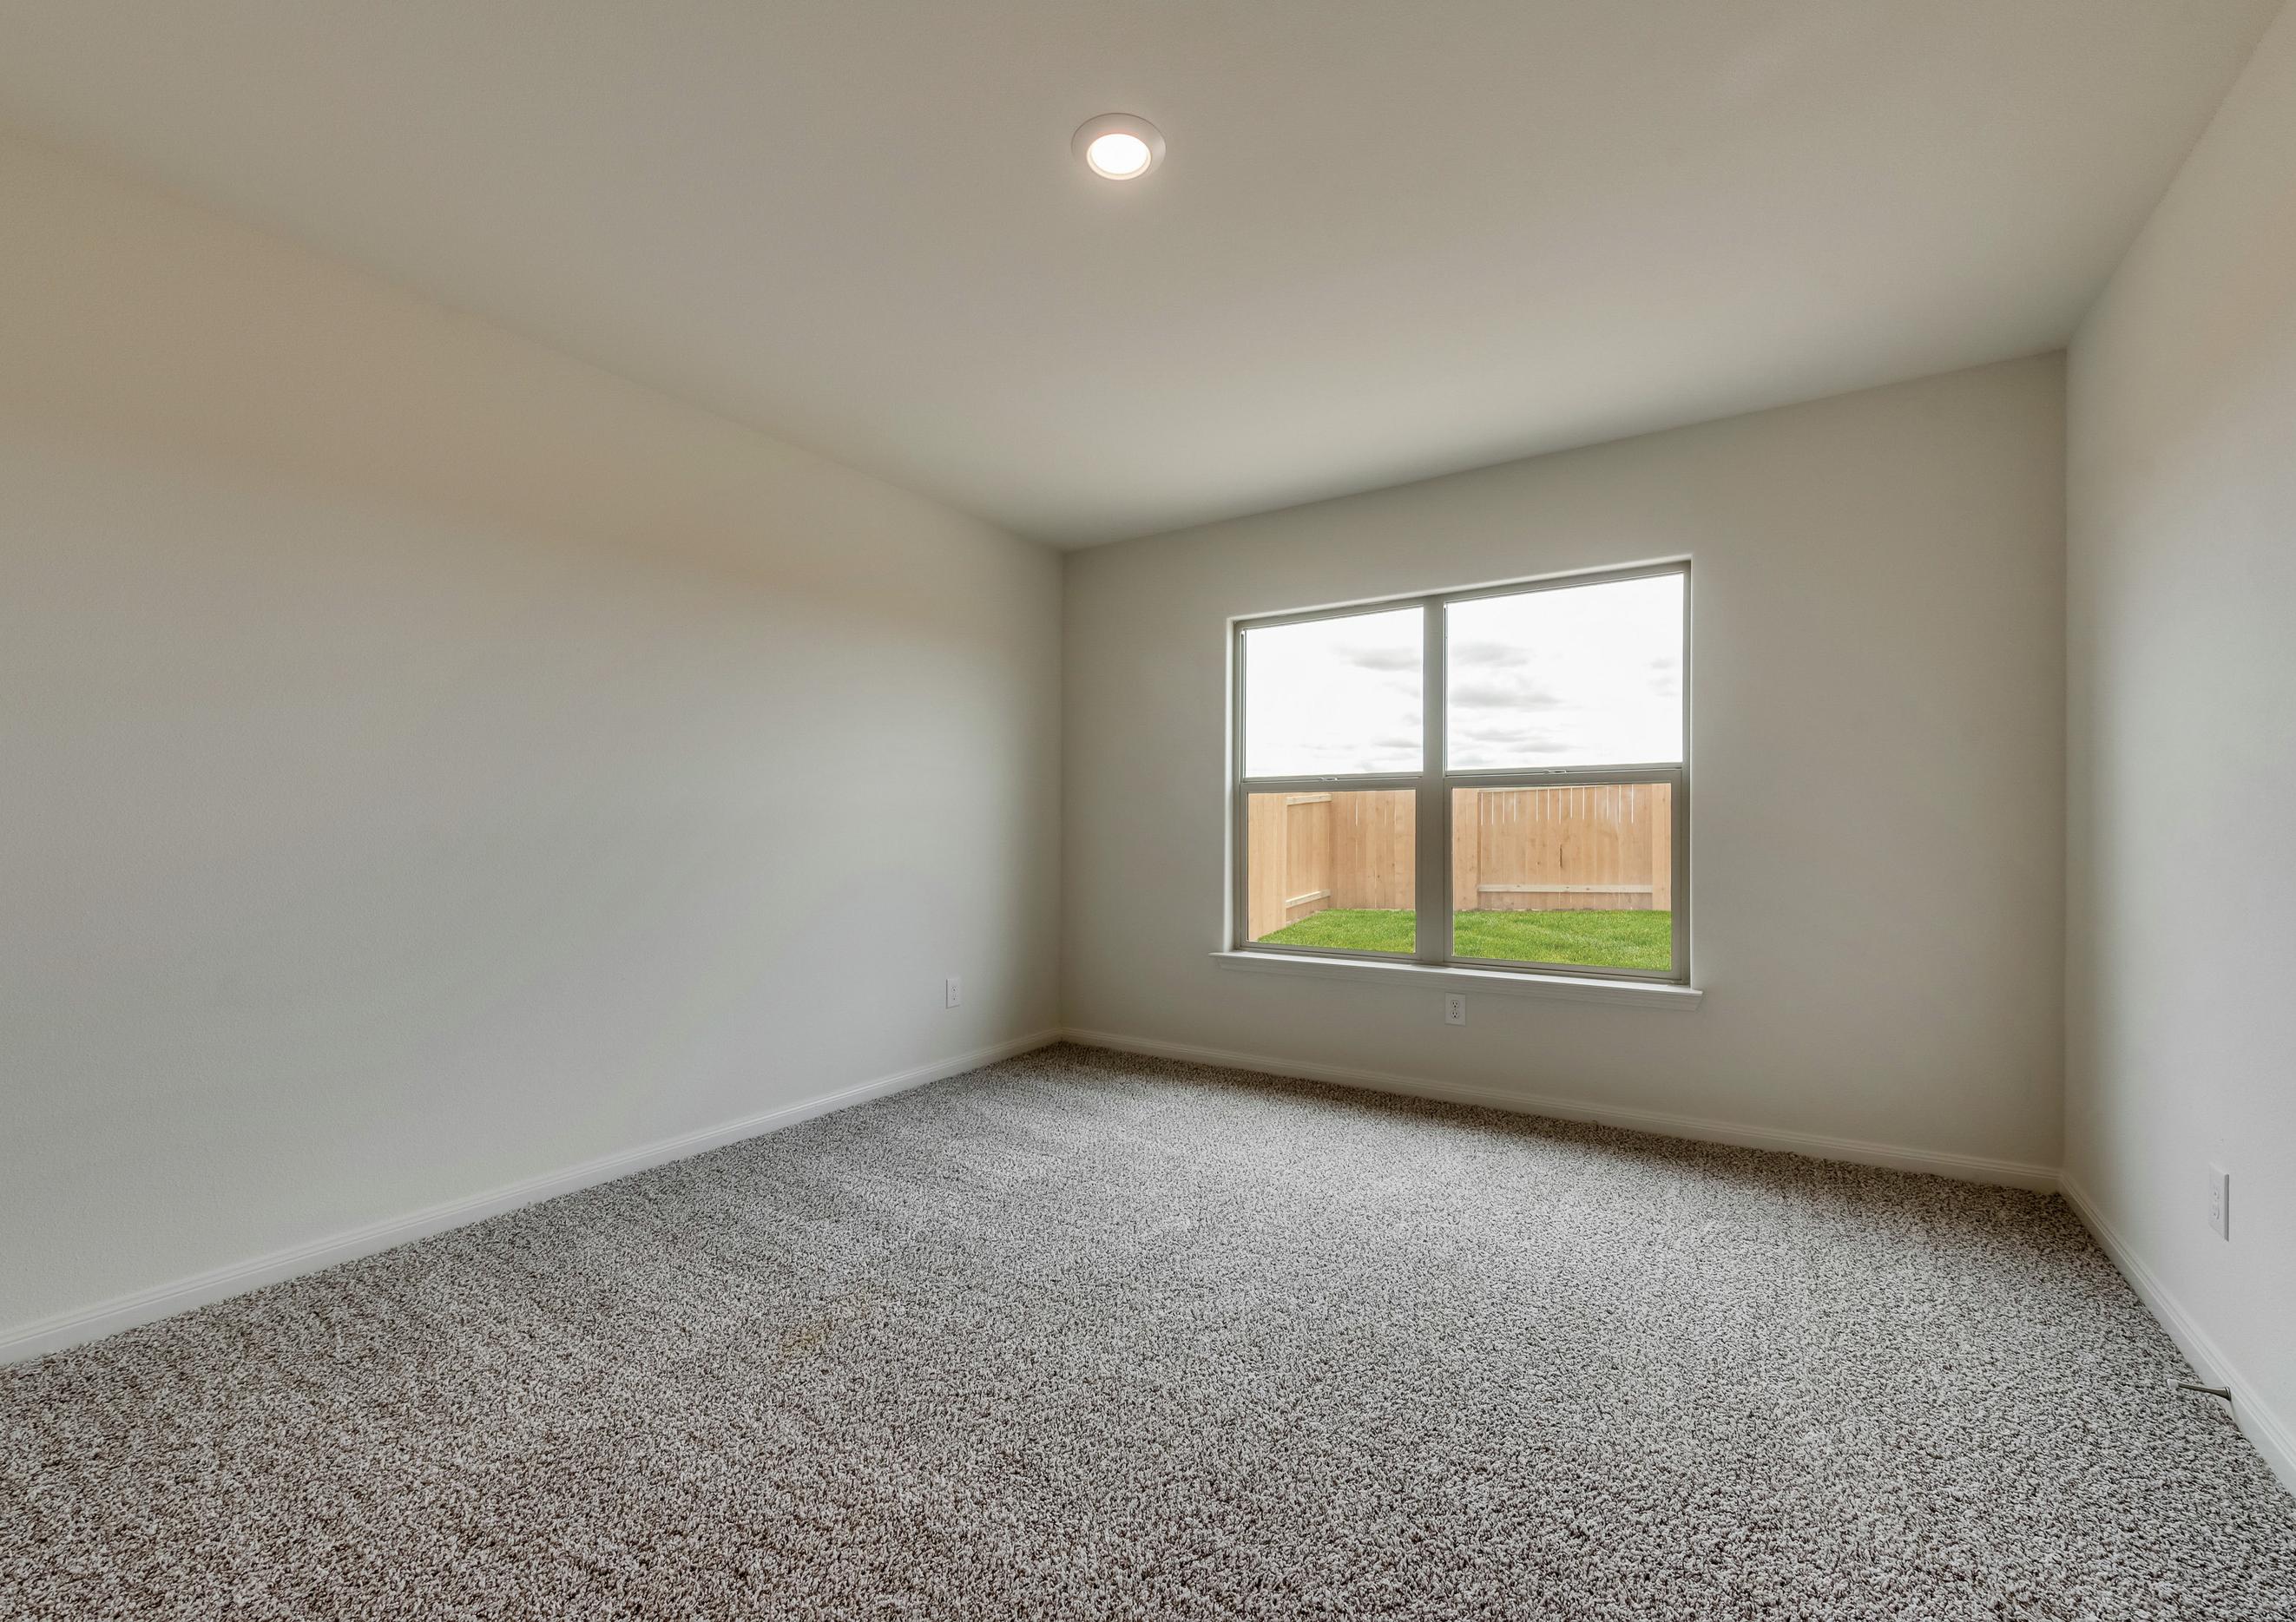 The master suite has great natural light, brown carpet and white walls.